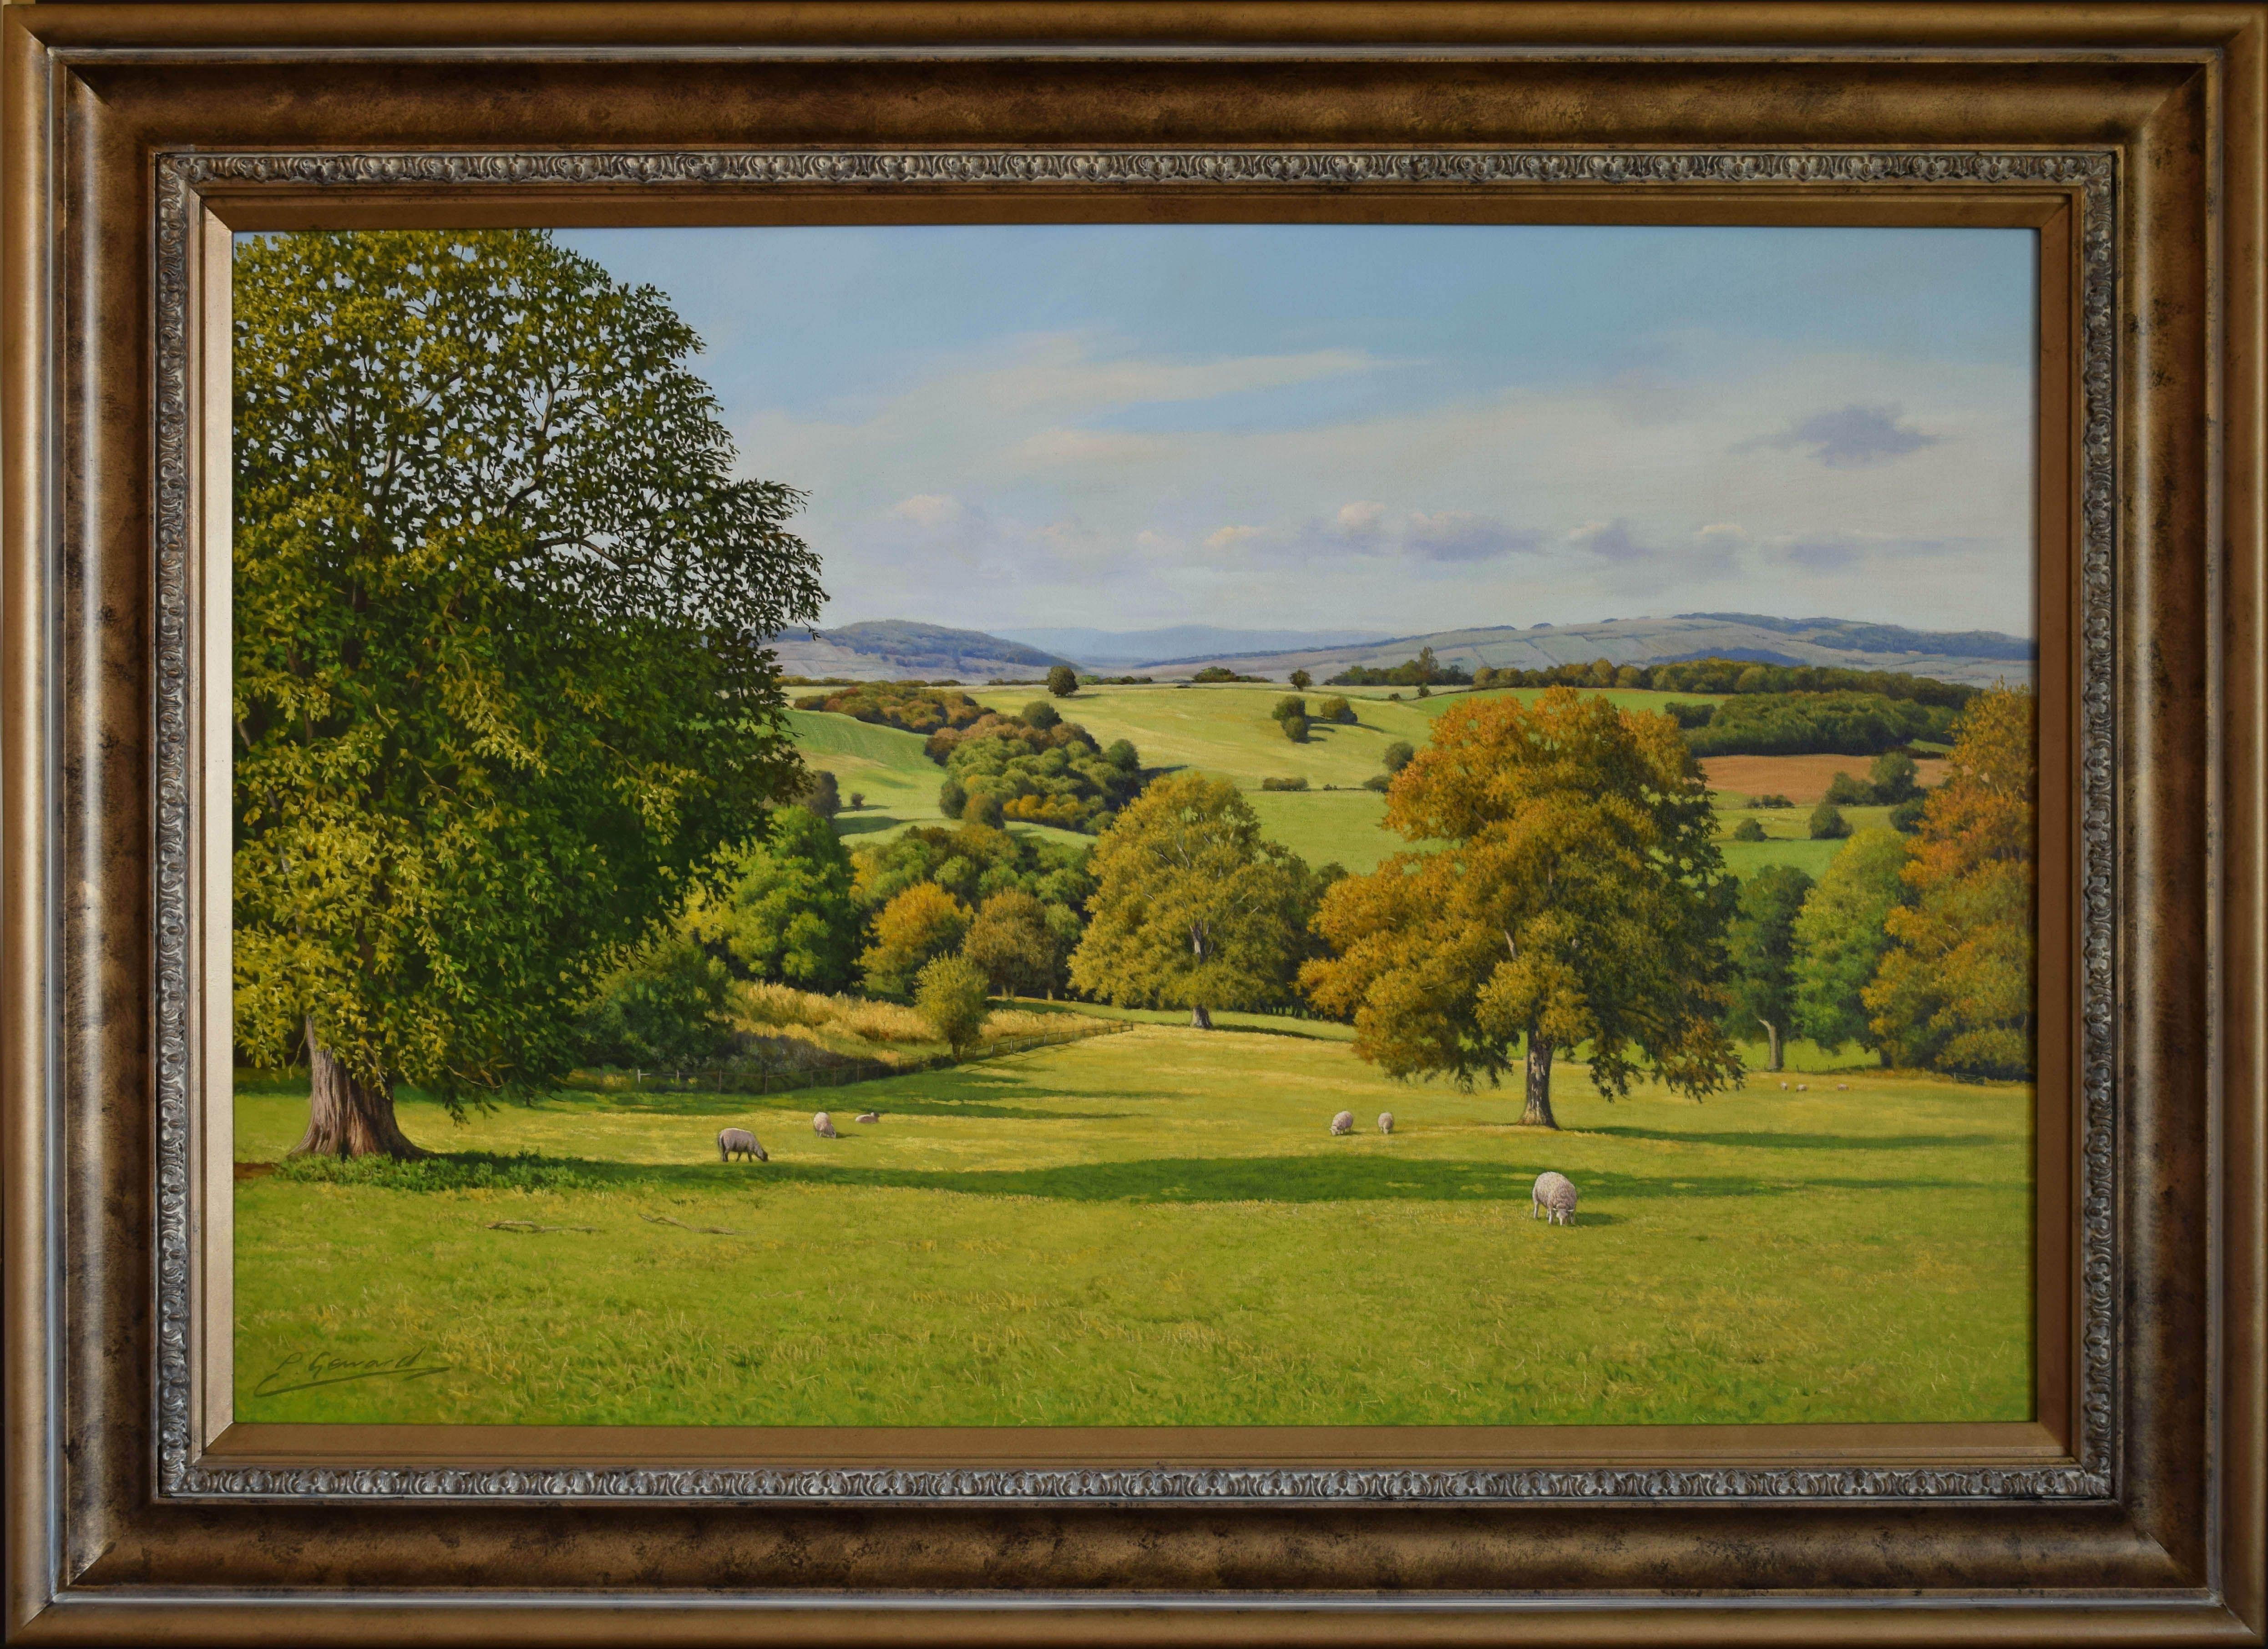 A large classical original English landscape realism oil painting which is suitable as a focal point in a room. The panoramic view across a Cotswold hillside and beyond is framed by trees and there are sheep grazing in the pasture. The subtle soft